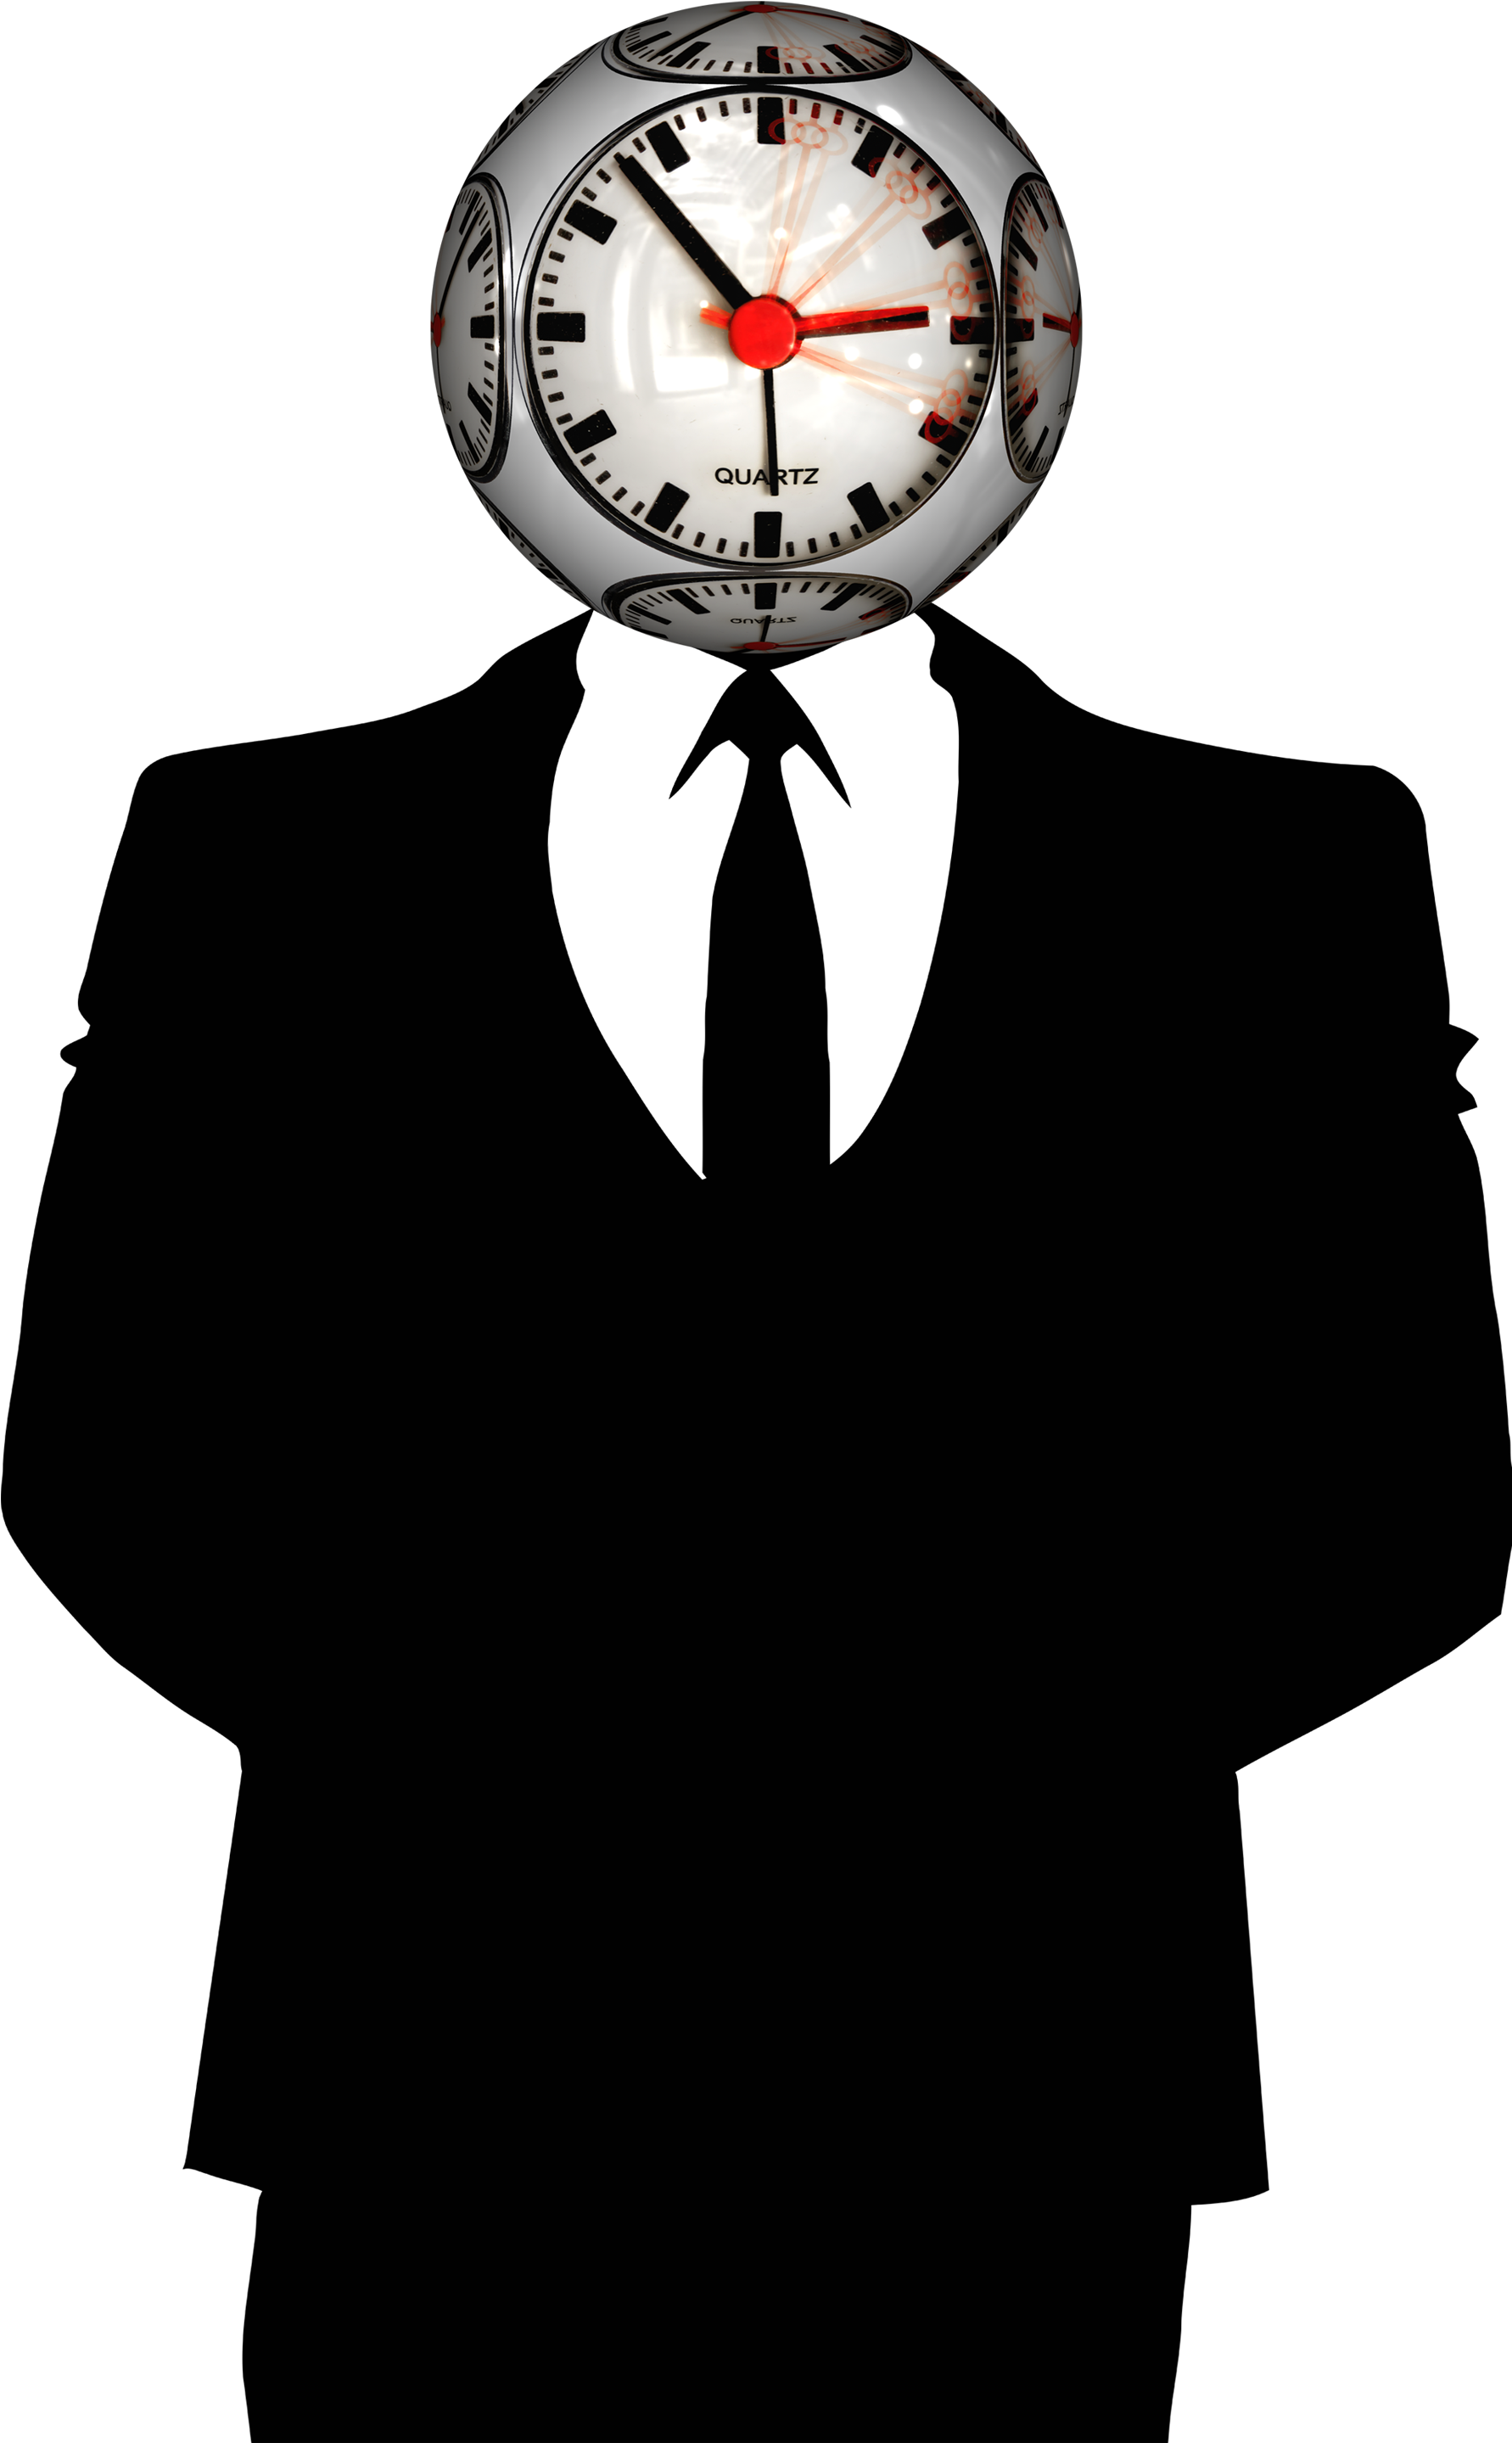 A Man In A Suit And Tie With A Clock On His Head